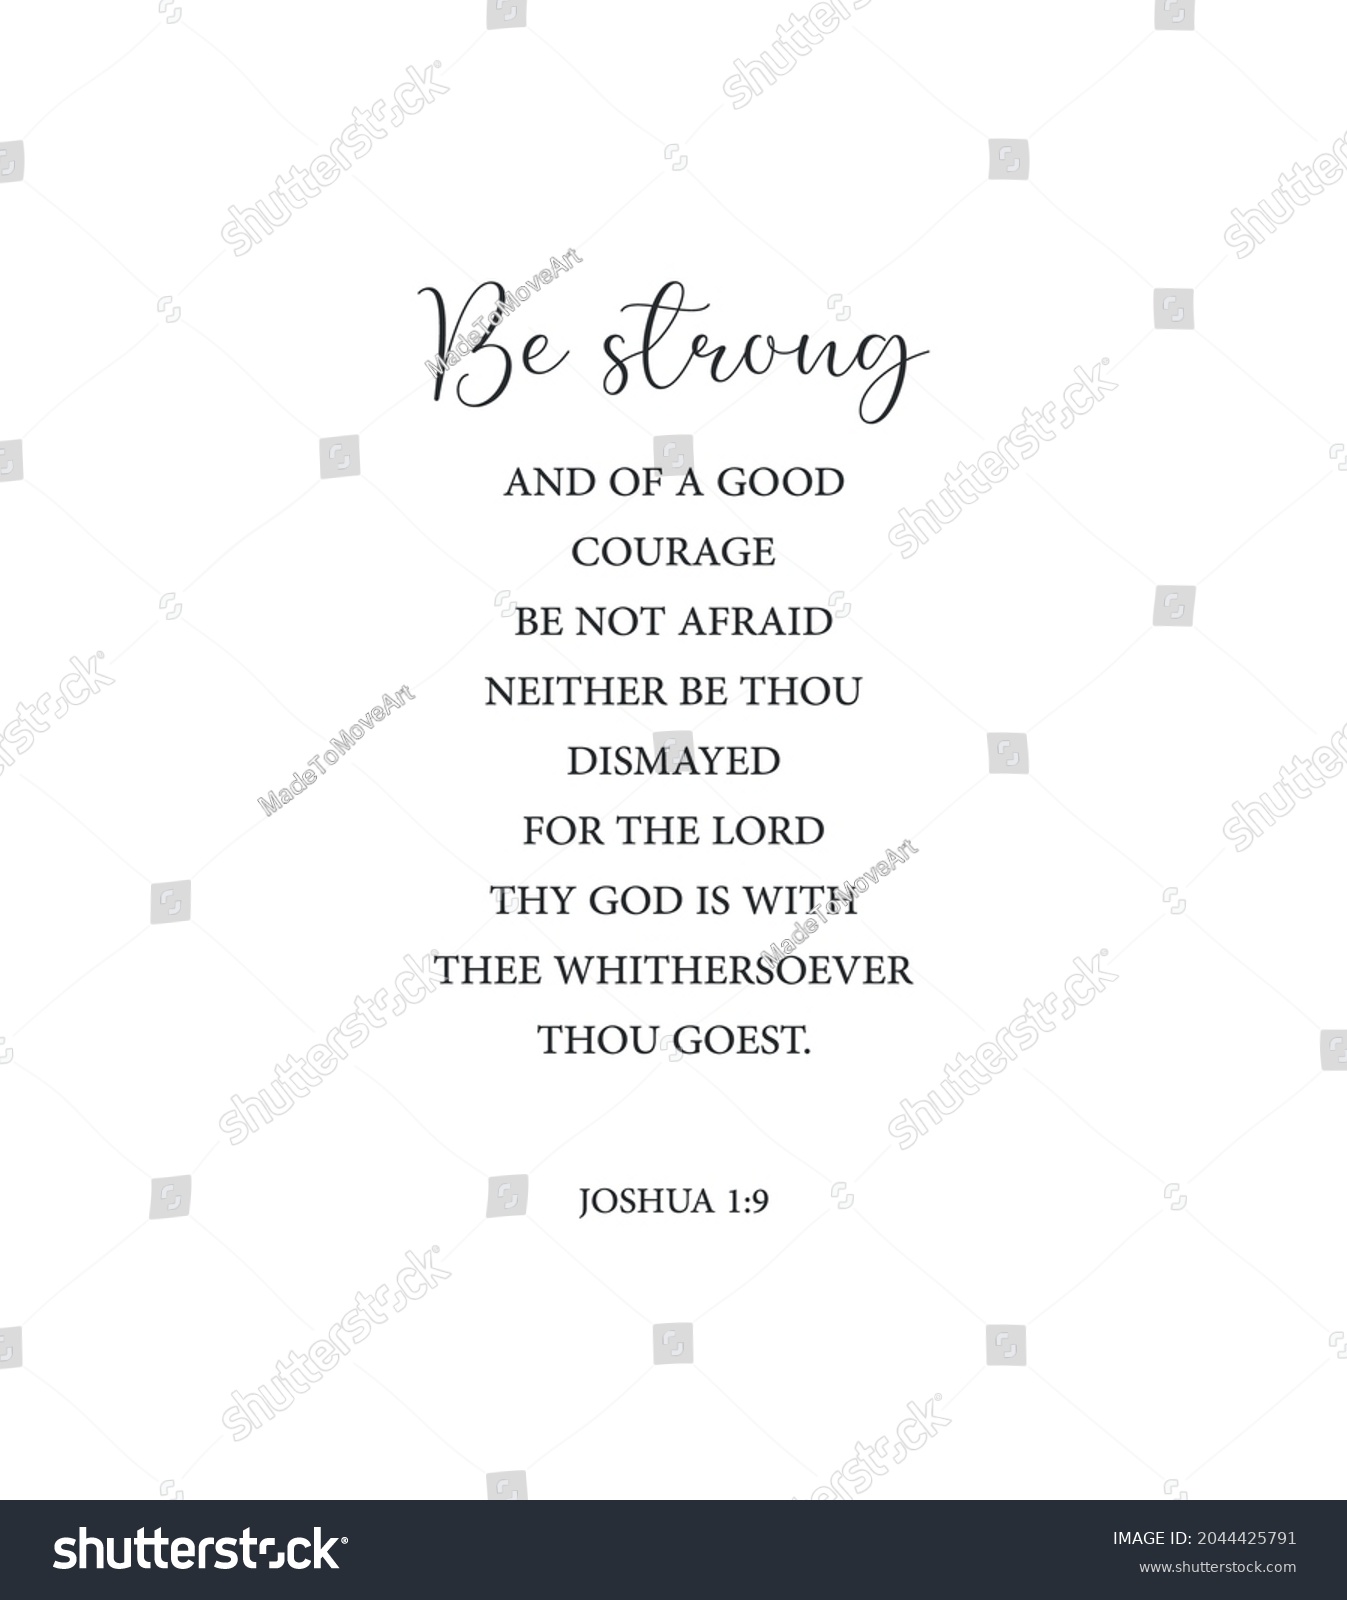 SVG of Be strong and of a good courage; be not afraid, Joshua 1:9, bible verse printable, Christian wall decor, scripture wall print, Home wall decor, Christian banner, Minimalist Print, vector illustration svg